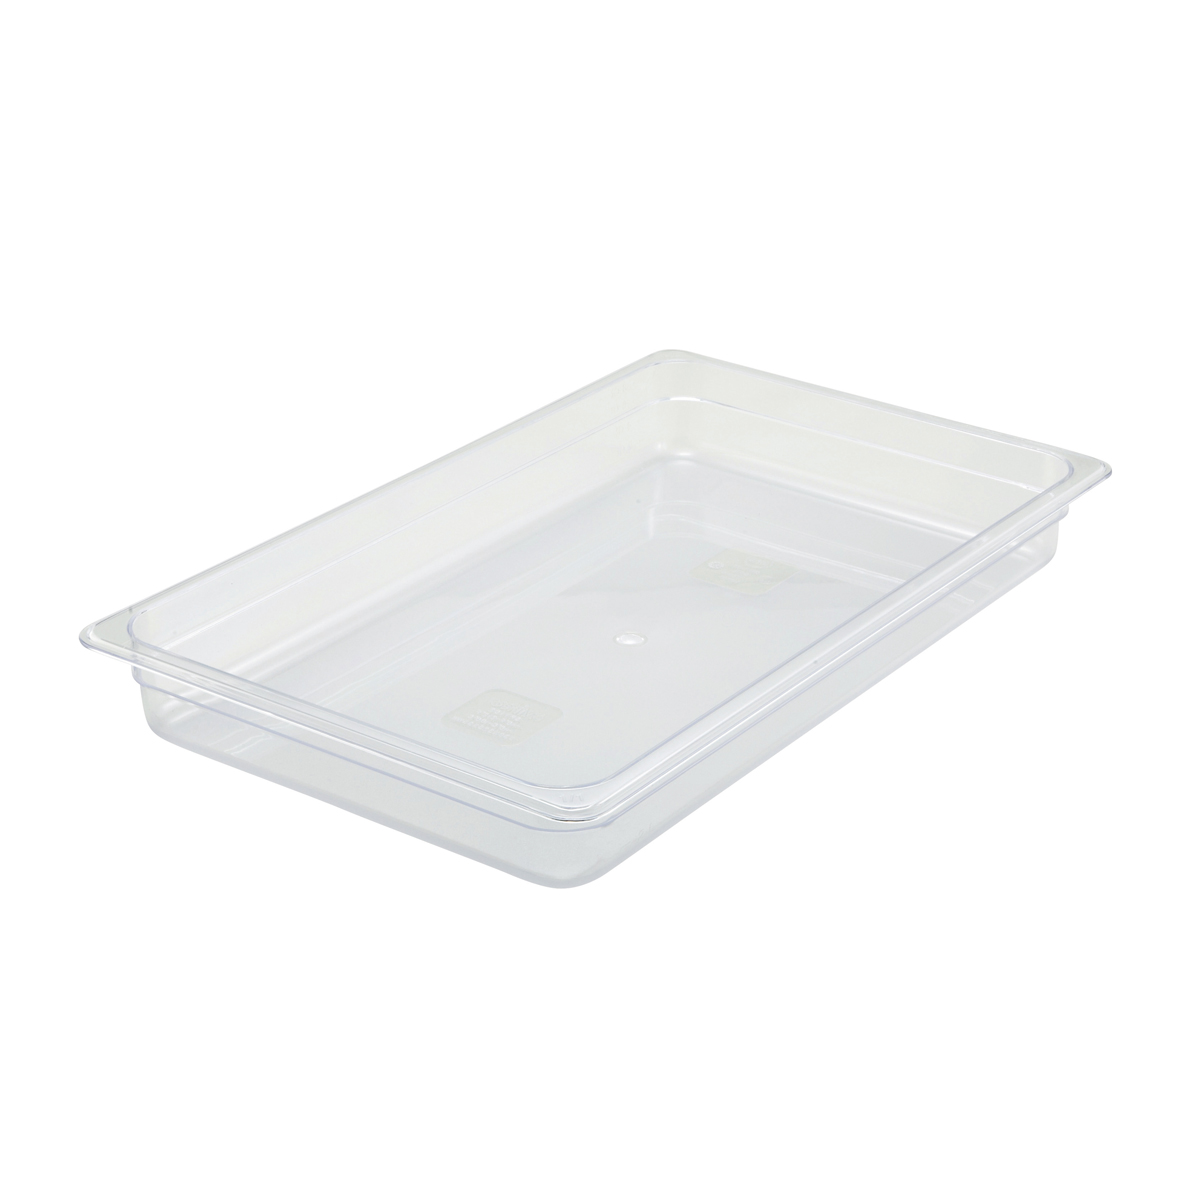 Winco SP7102 Poly-Ware Full Size Food Pan 20-3/4" x 12-1/2" x 2-1/2" High